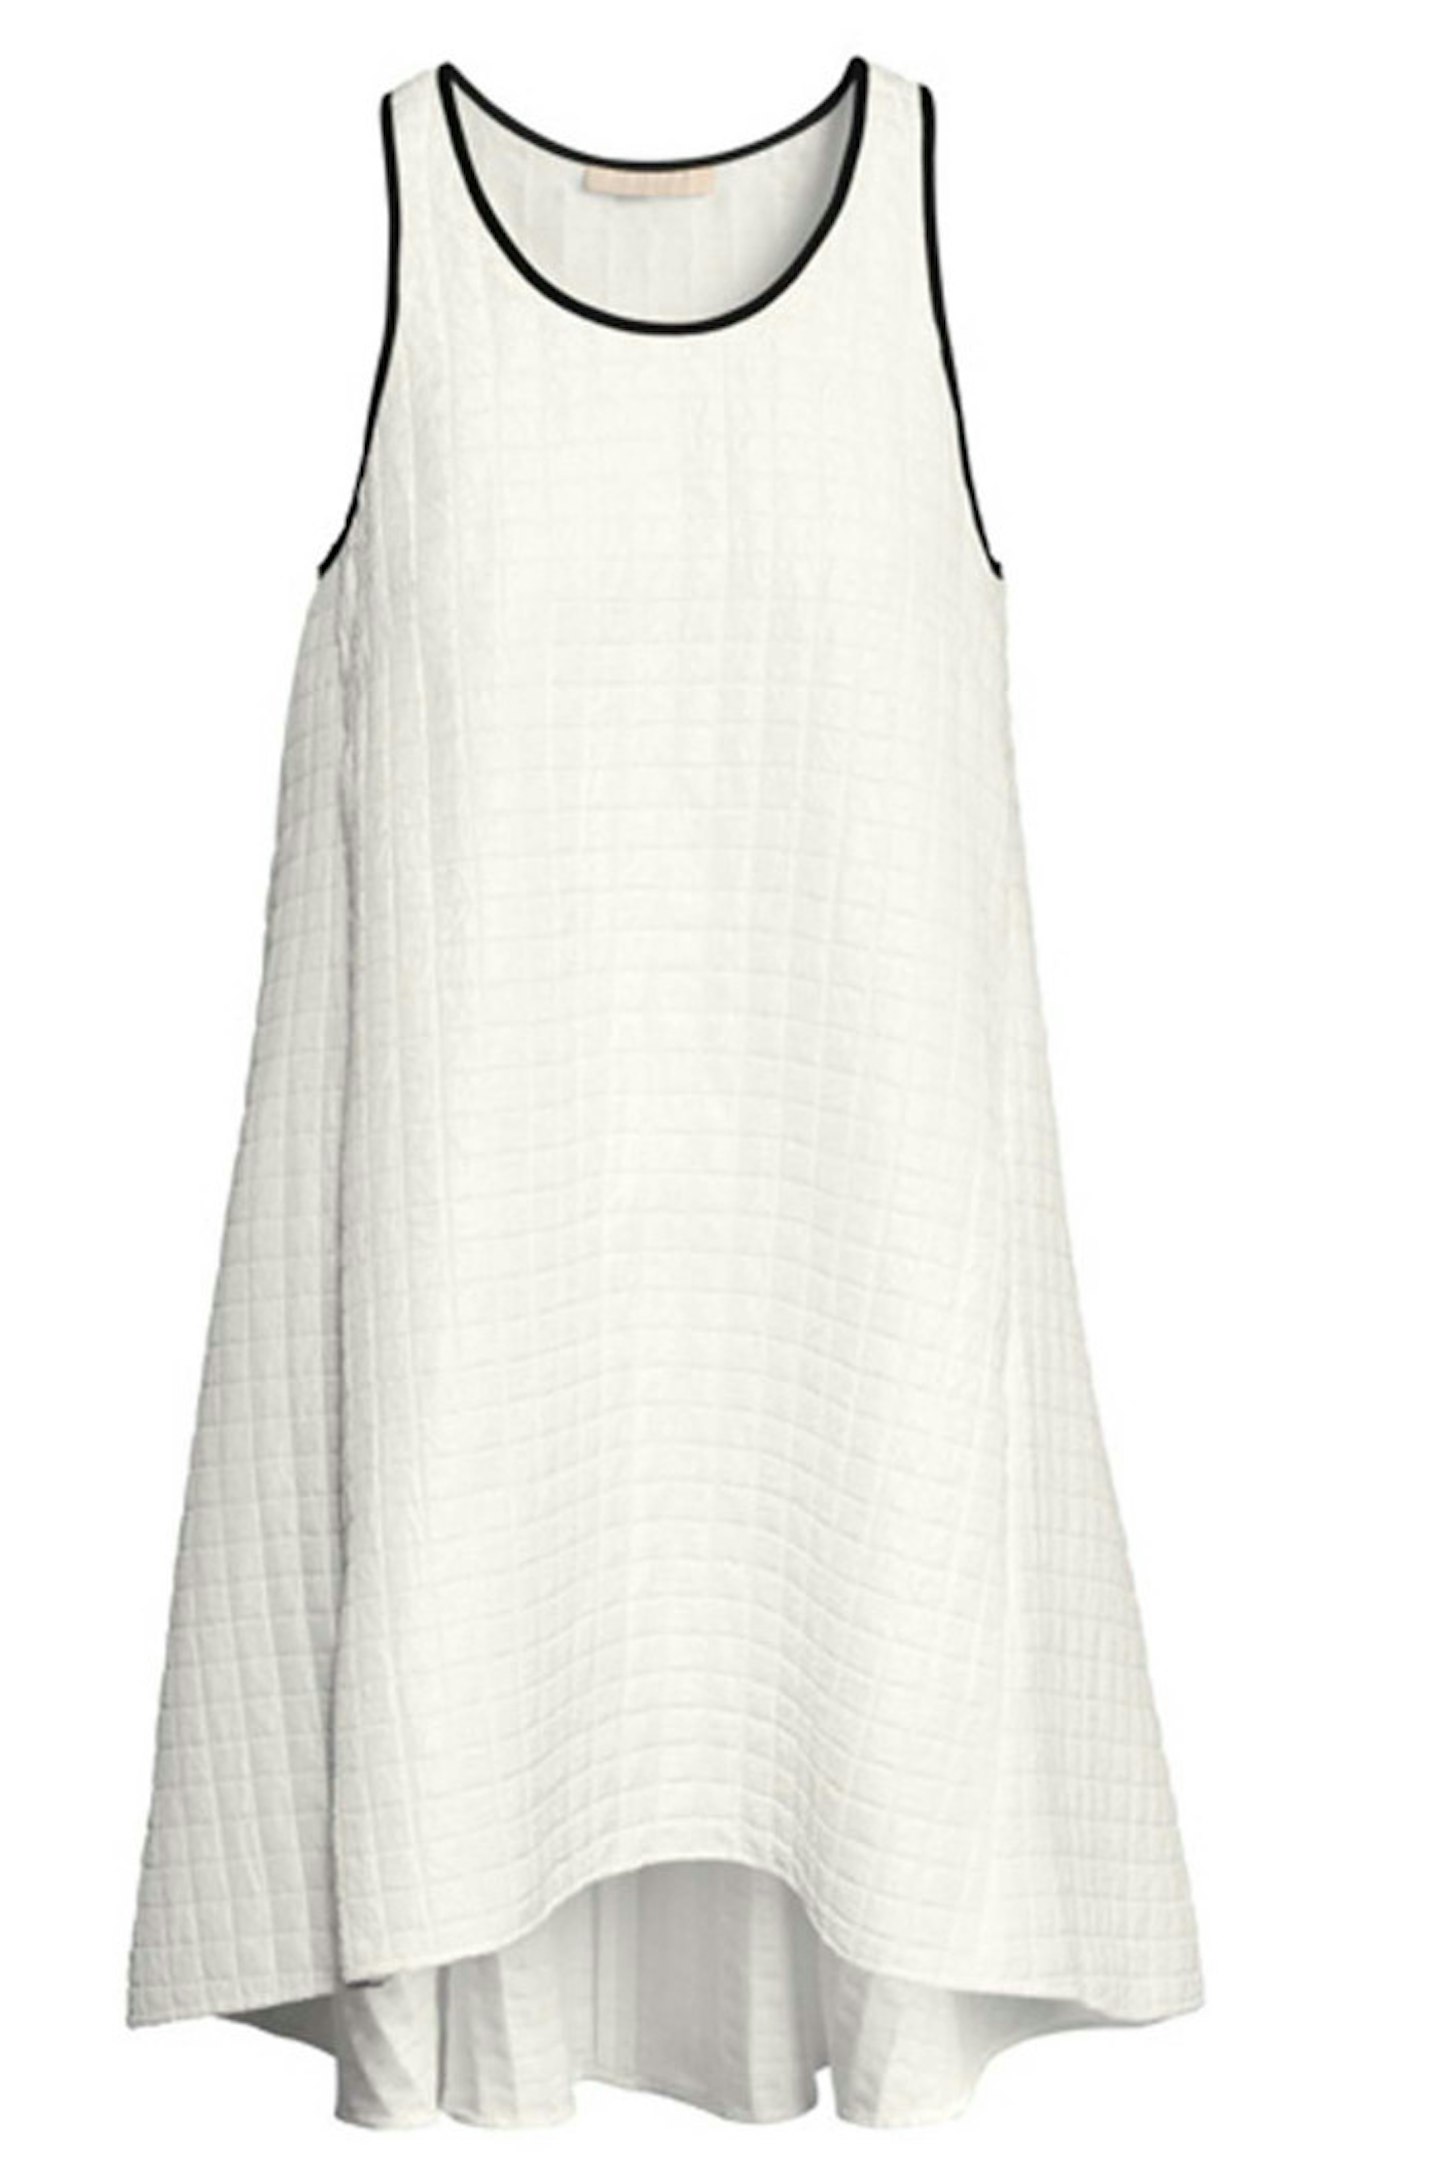 44. Dress With Textured Pattern, £29.99, H&M